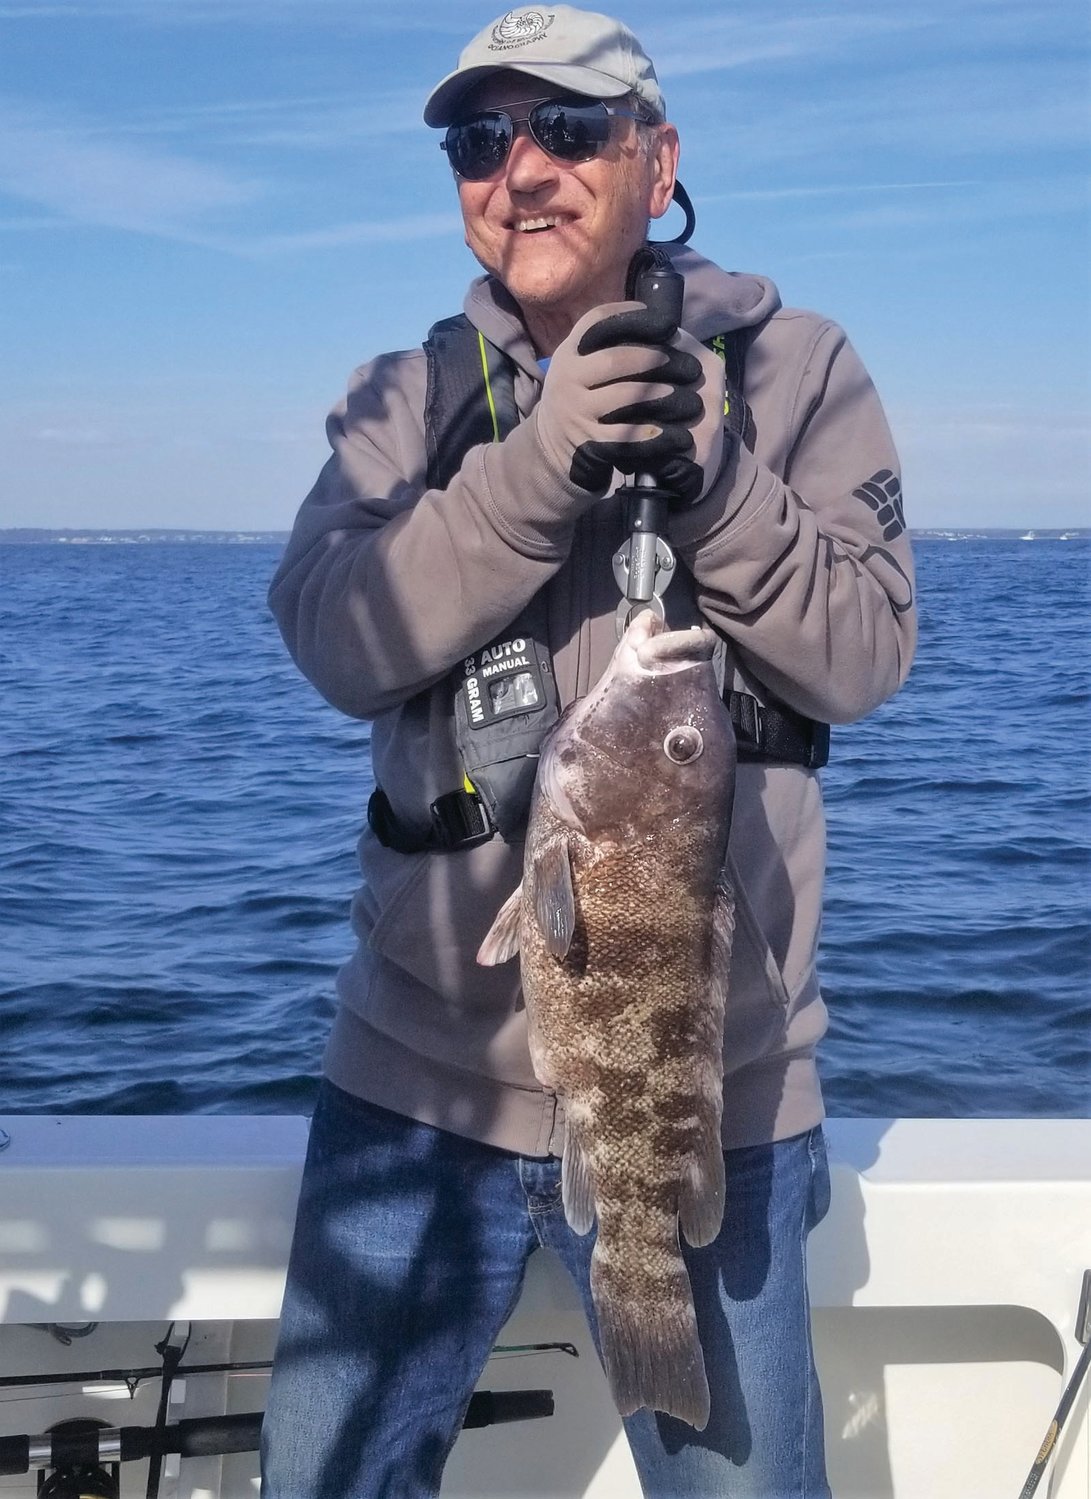 TAUTOG JUNKIES:  Chris Deacutis, North Kingstown, with a 23-inch tautog he caught fishing with Hal Walker, Wakefield and Walt Galloway, West Greenwich. They trio caught their ten fish boat limit in three hours.